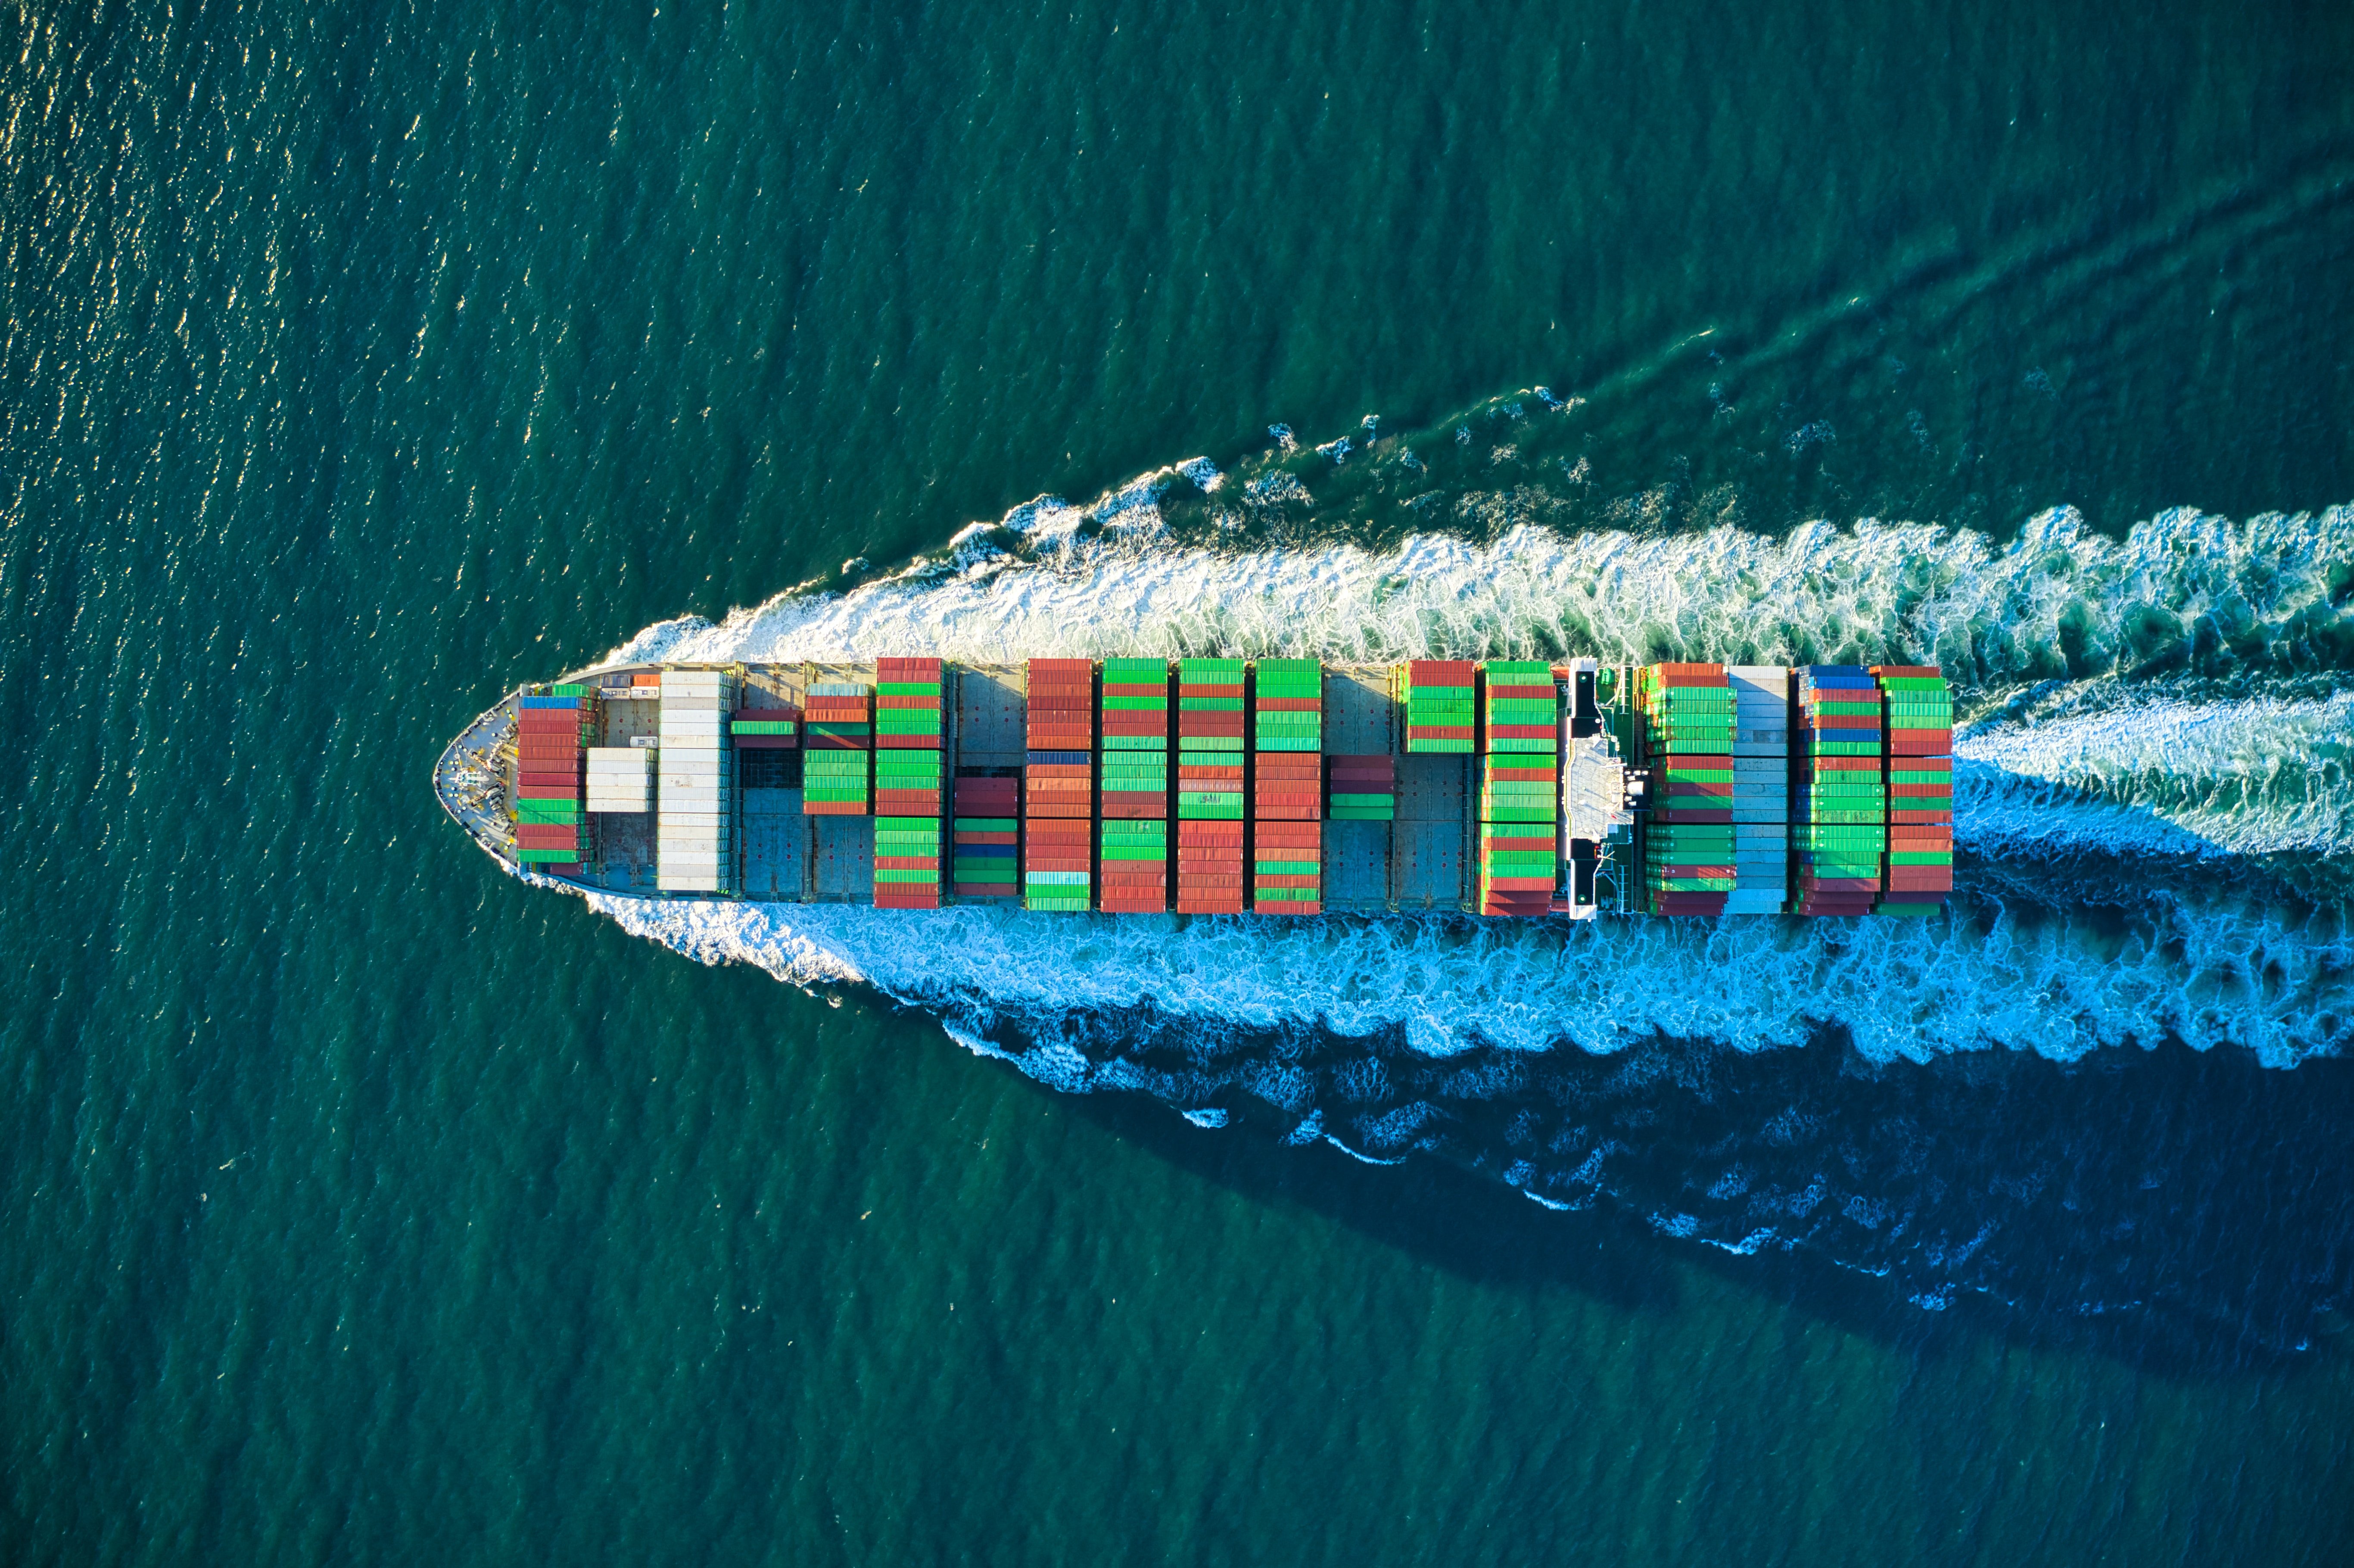 Aerial shot of a ship moving in water